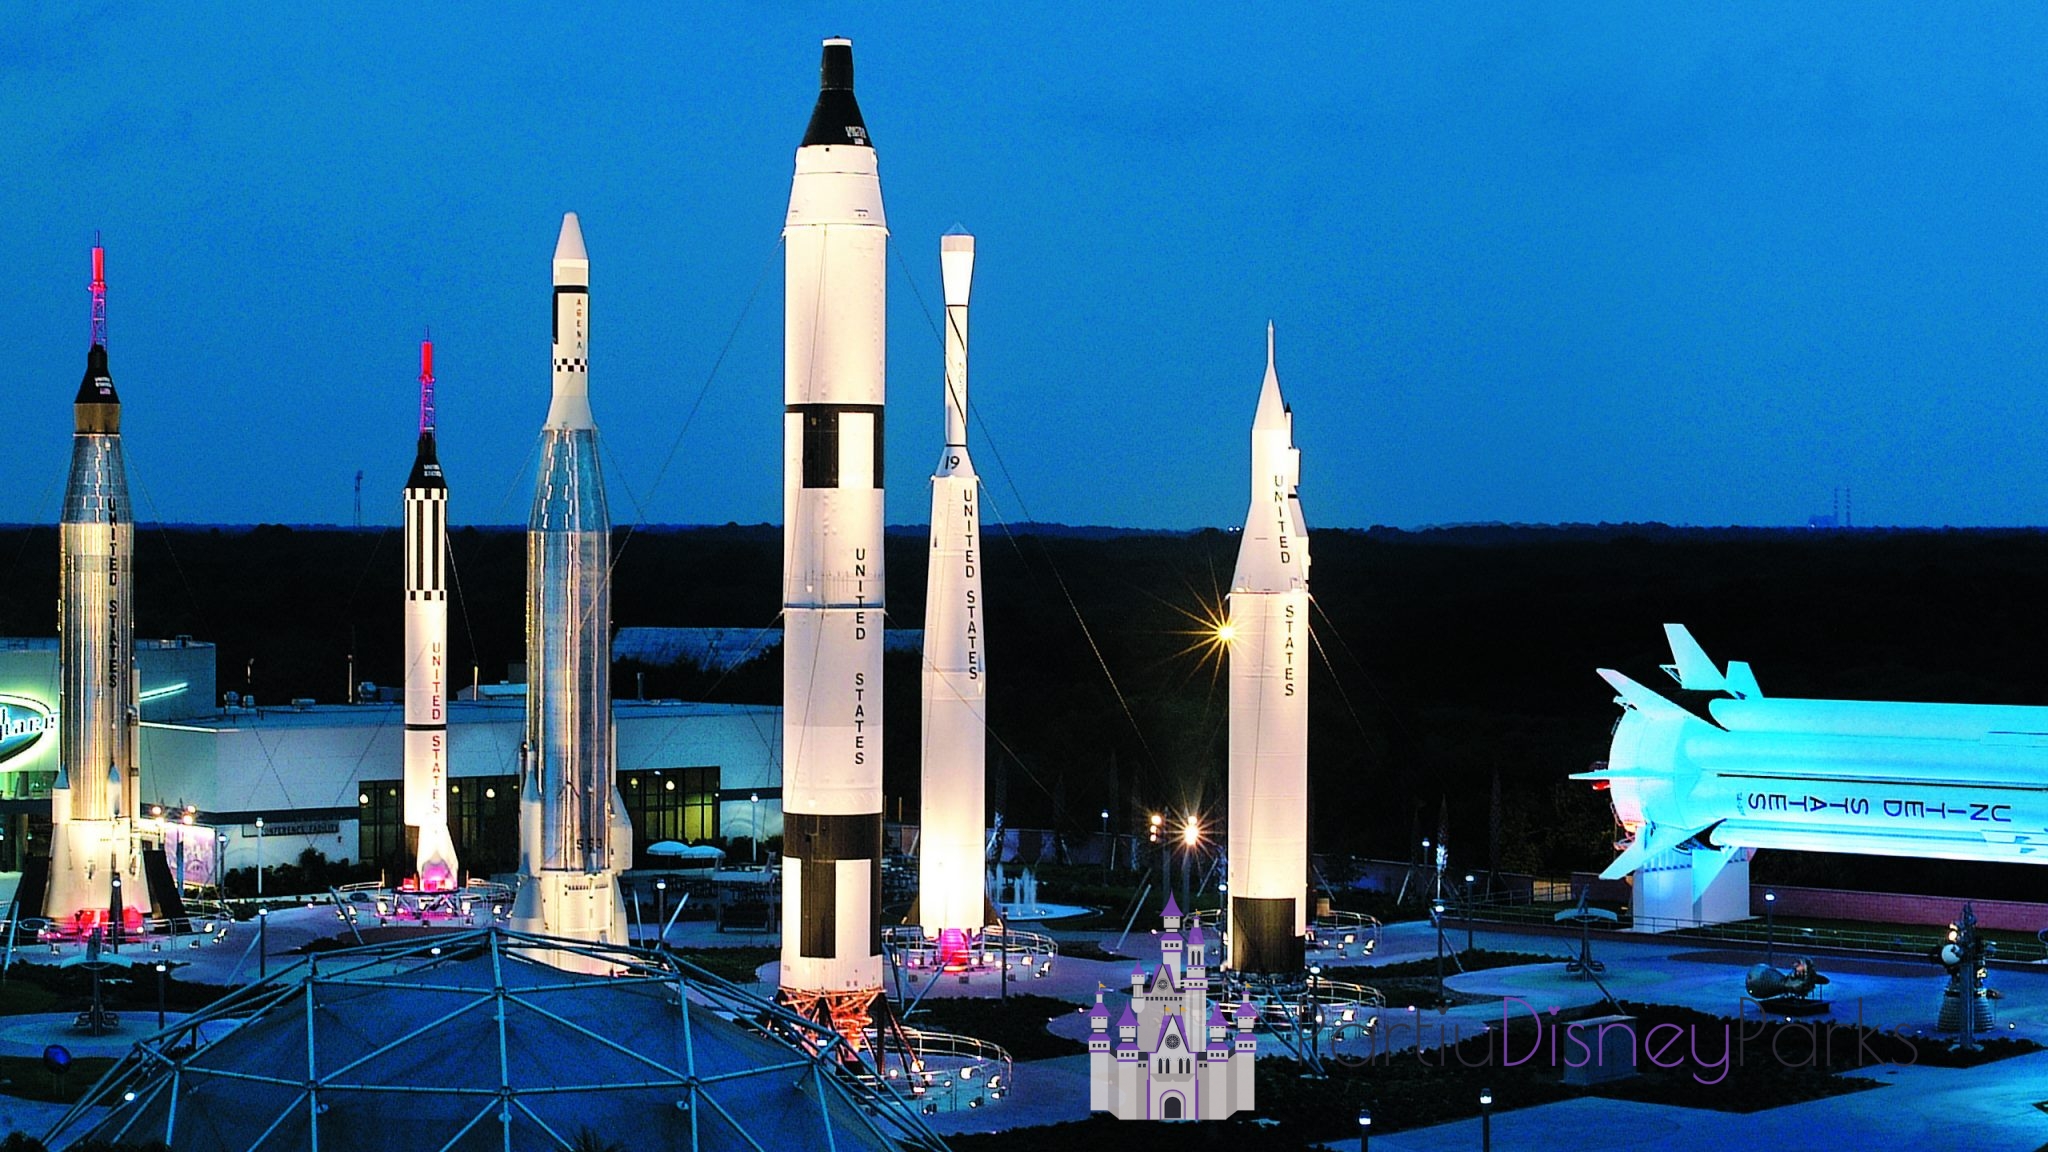 Don't miss out on space rockets at Rocket Garden